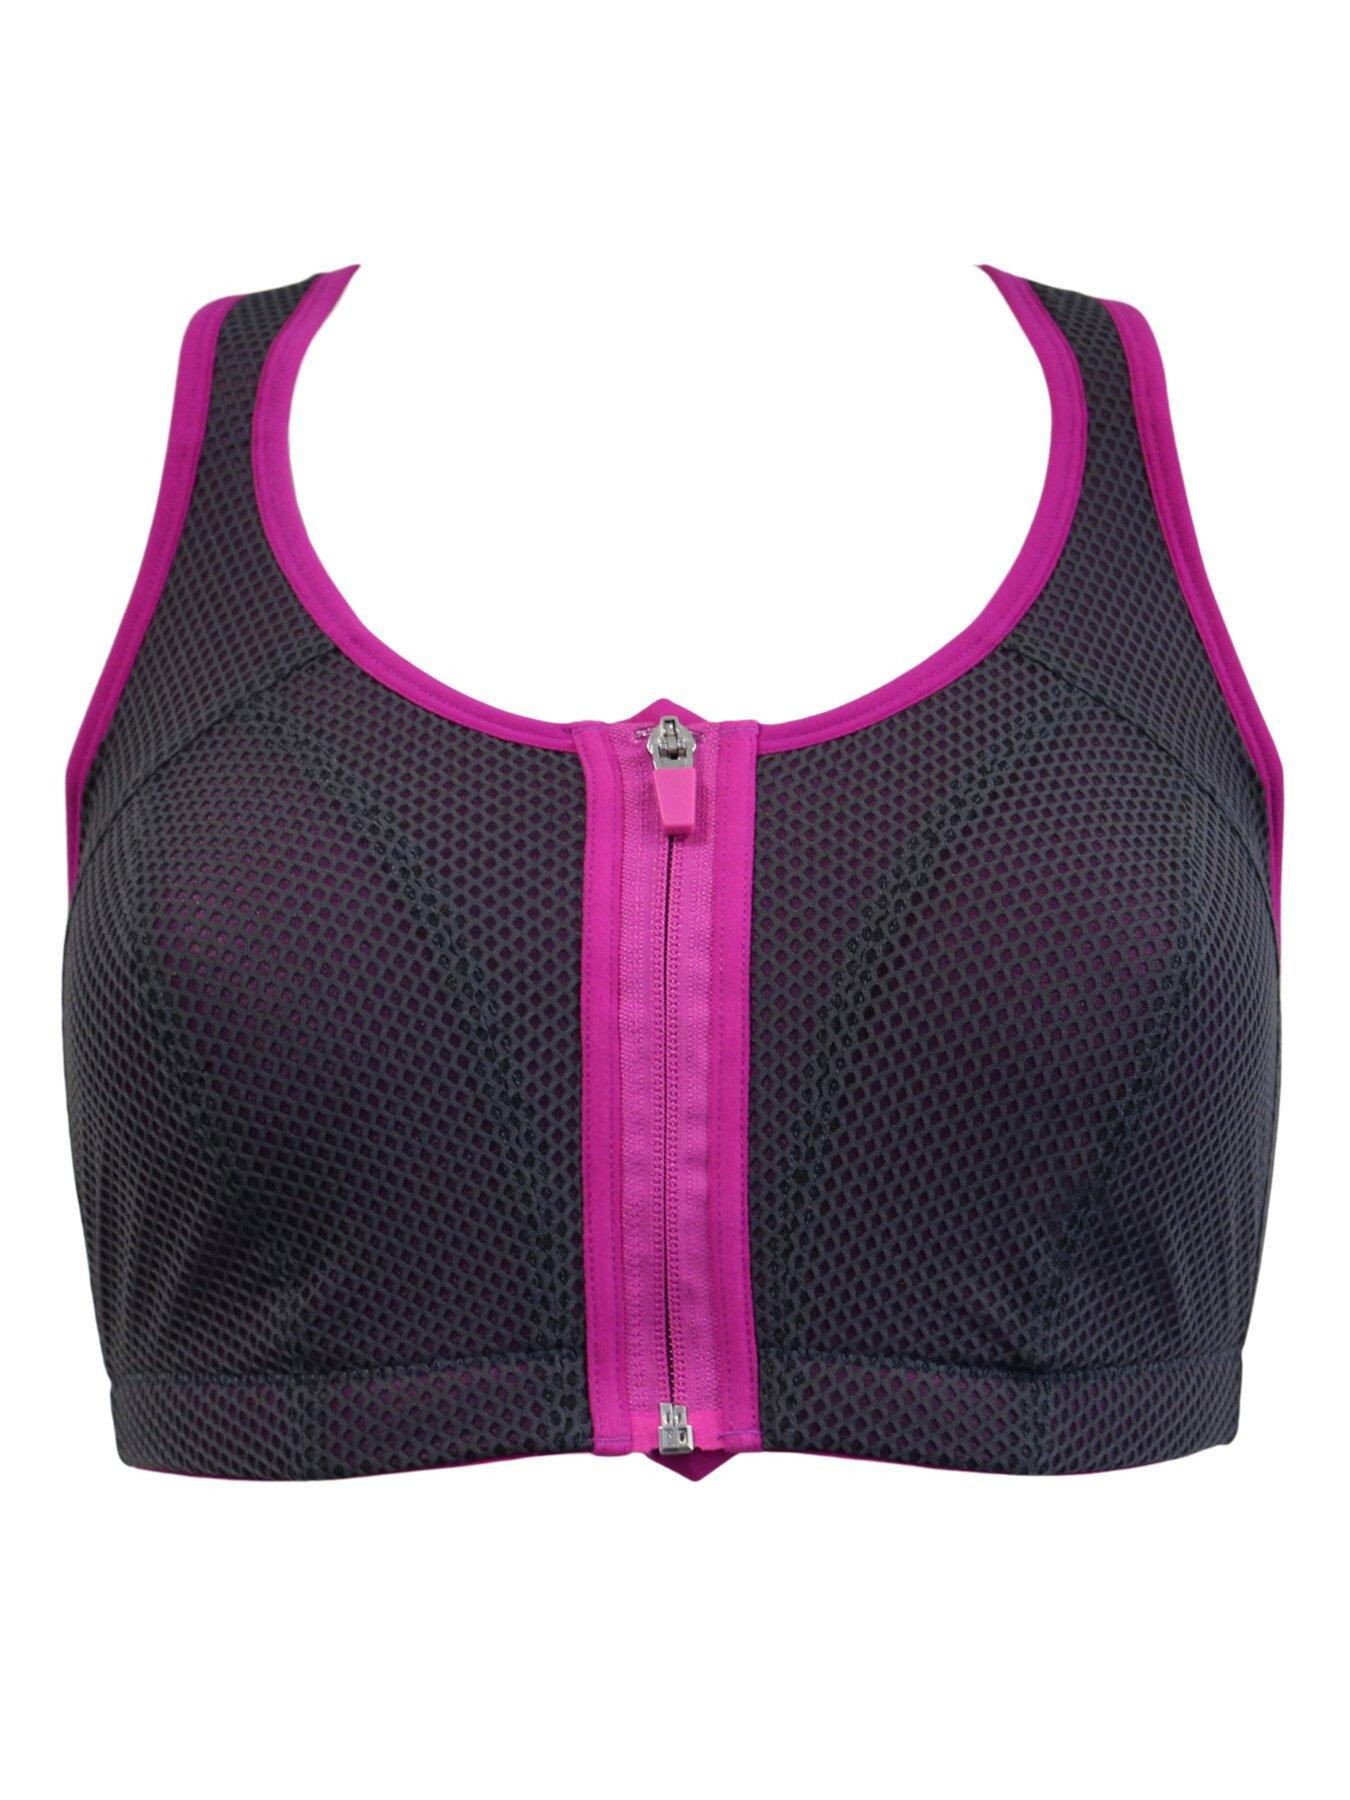 Smart tip: create a crossing bra piece for your special tops for